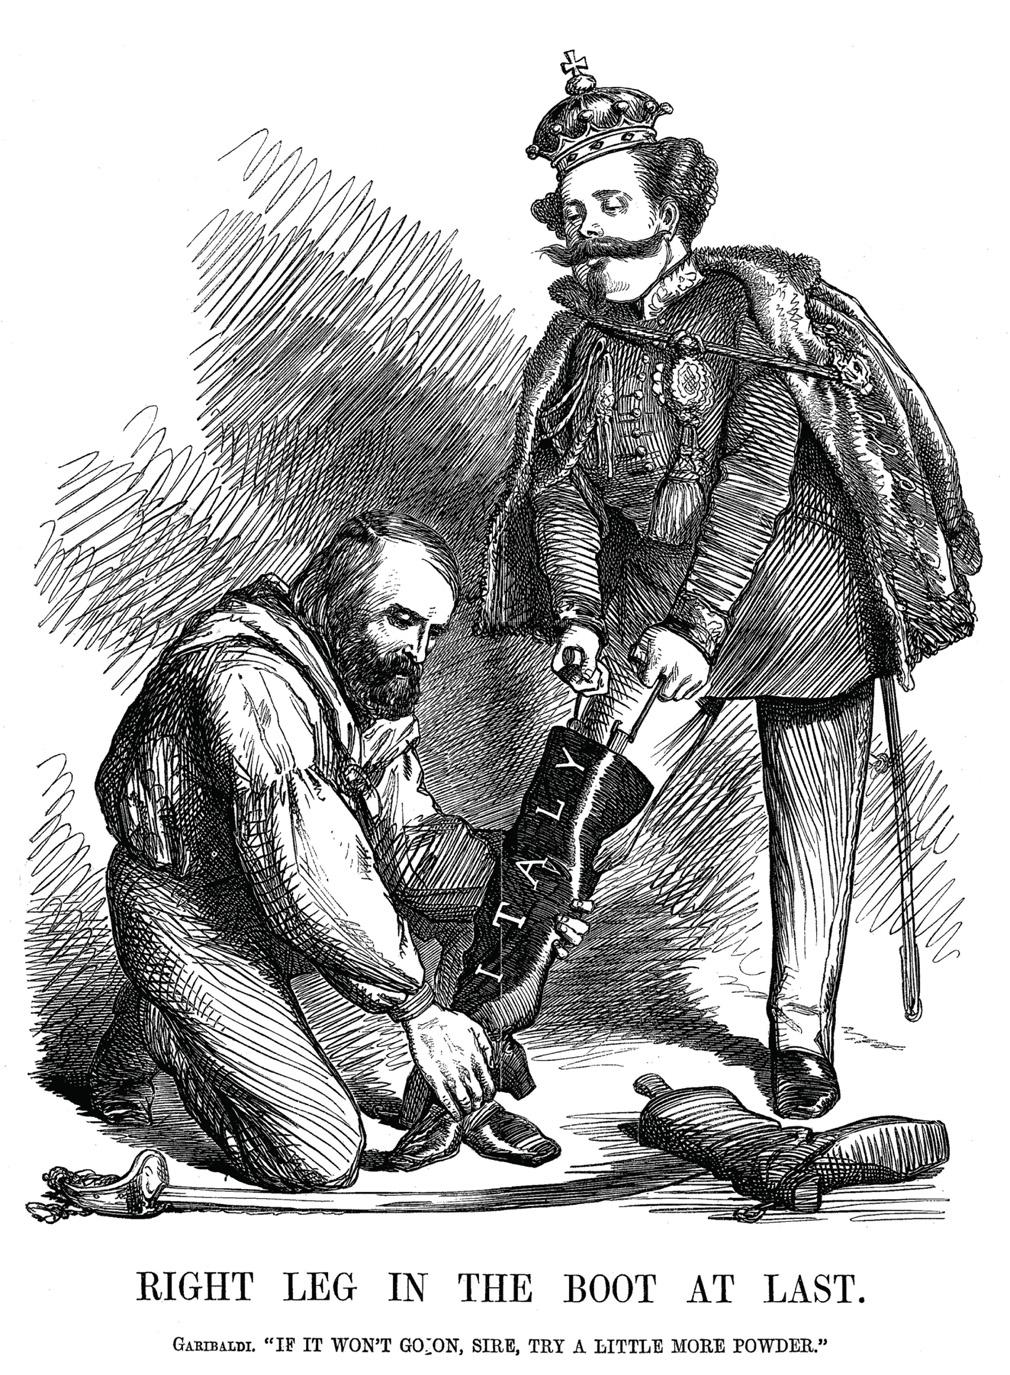 In this Punch cartoon from November 1860, Garibaldi s decision to accept Victor Emmanuel as king of Italy is portrayed as submission.